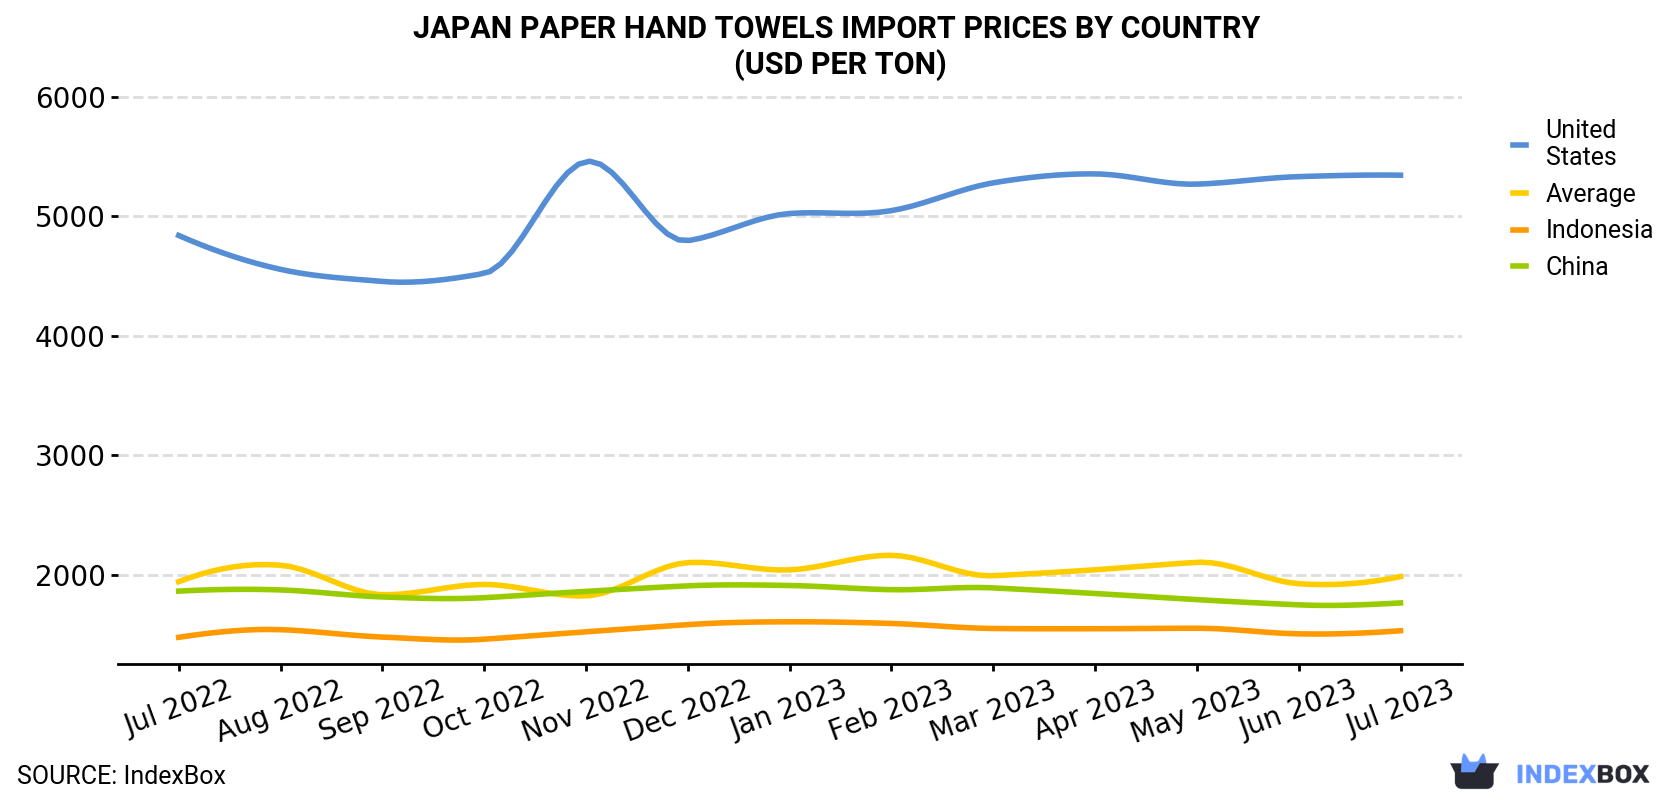 Japan Paper Hand Towels Import Prices By Country (USD Per Ton)